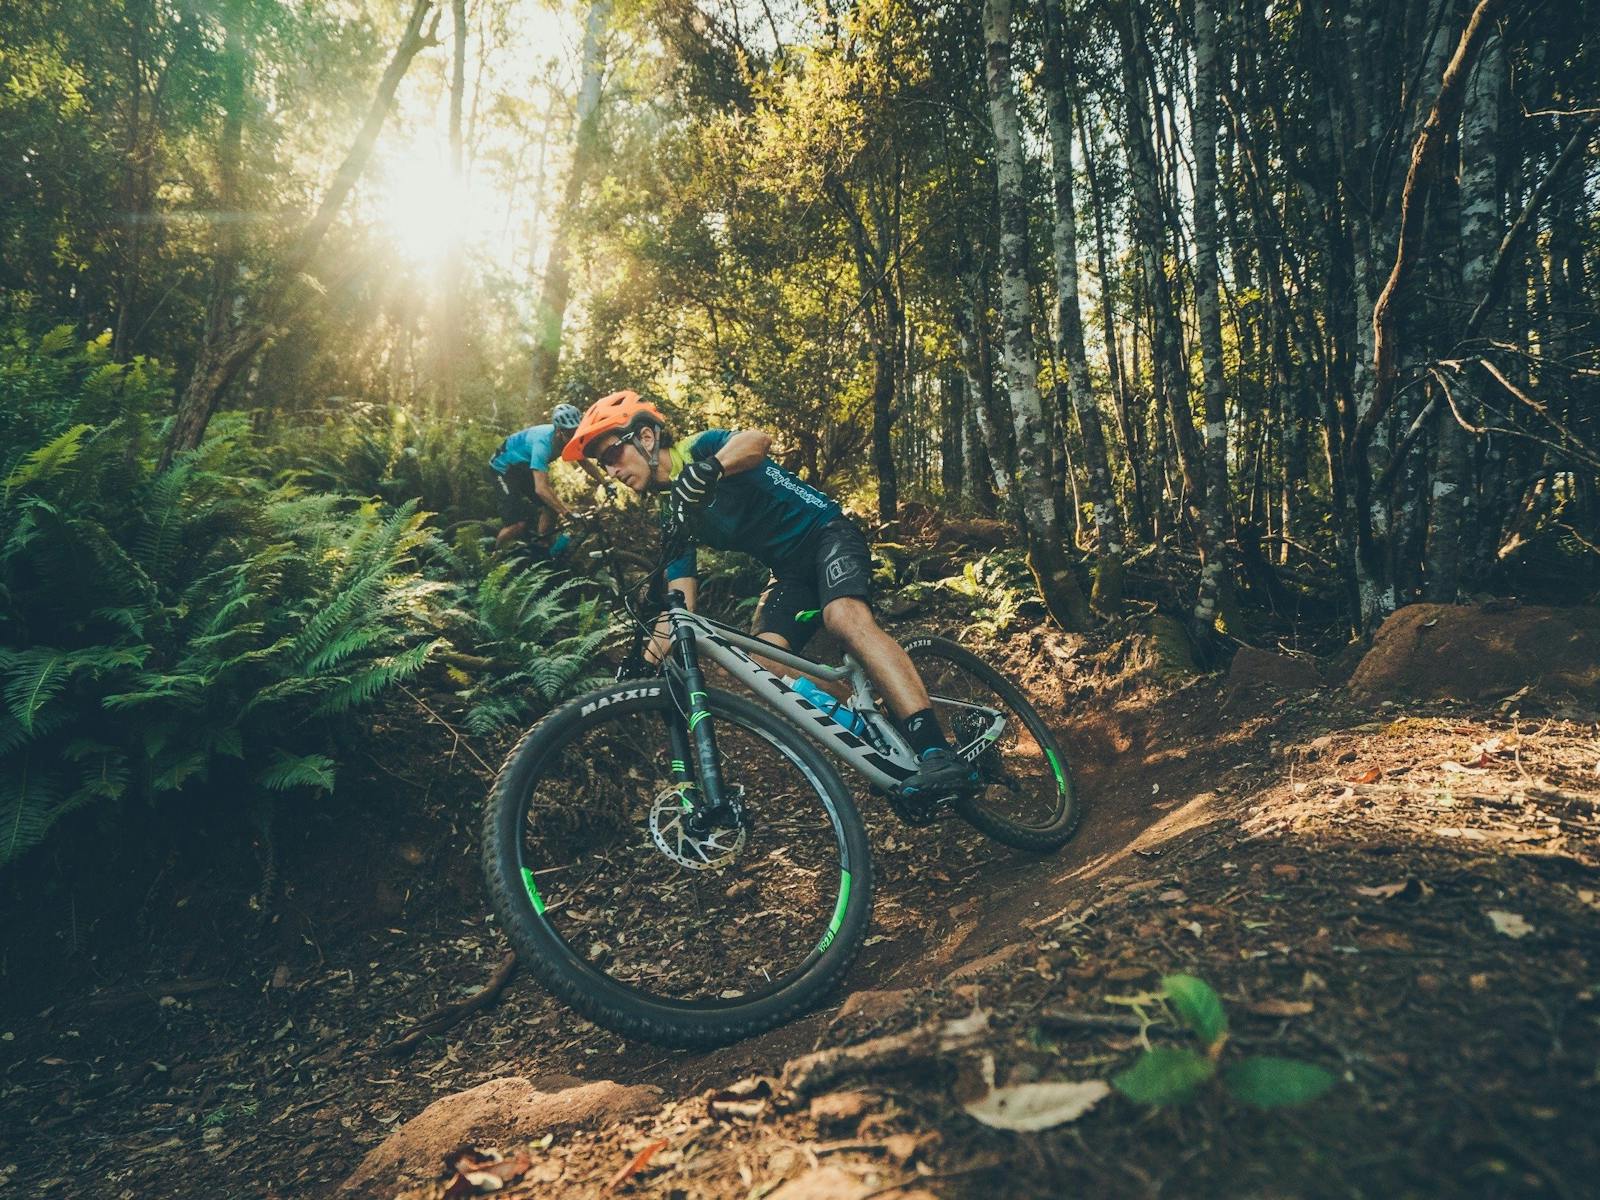 Men riding mountain bikes in the forest